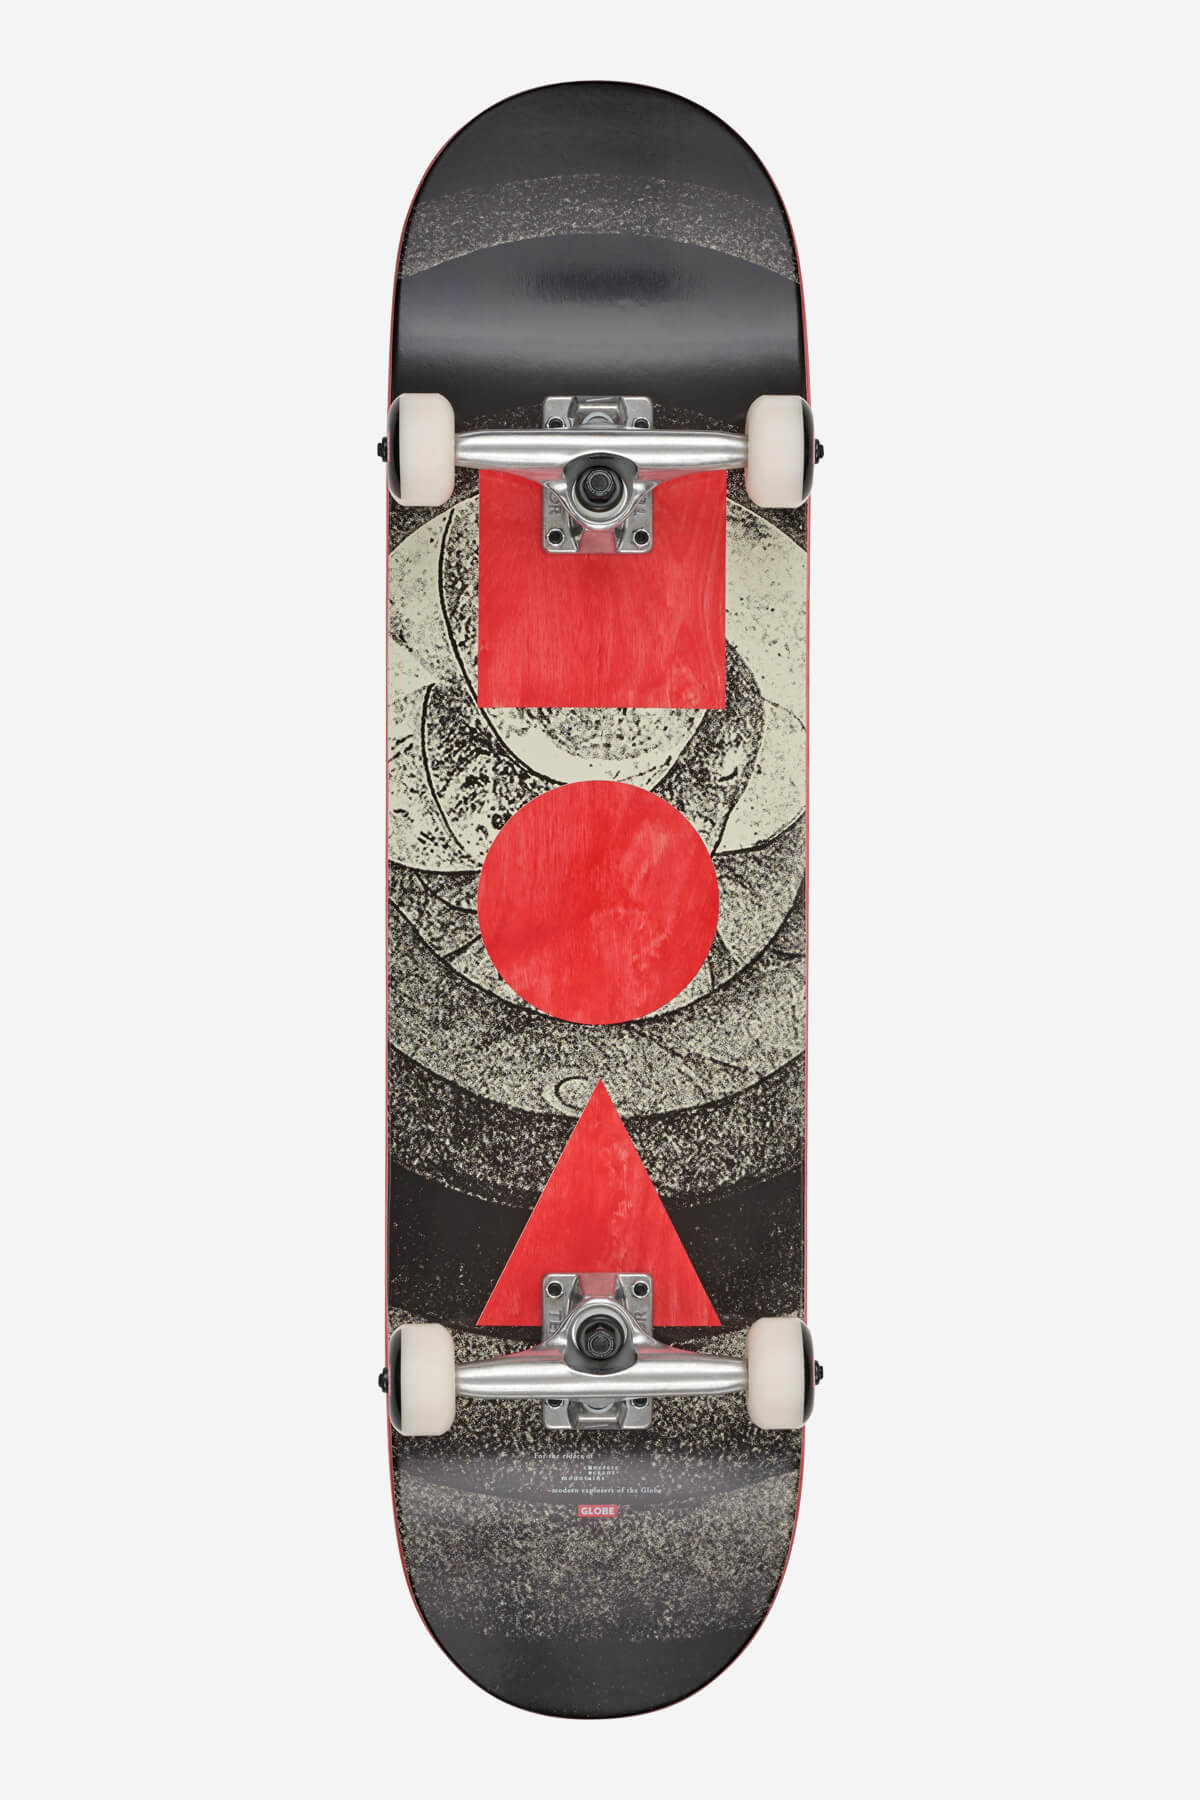 Globe - G1 Stack - Artificial Insanity - 8.125" Compleet Skateboard